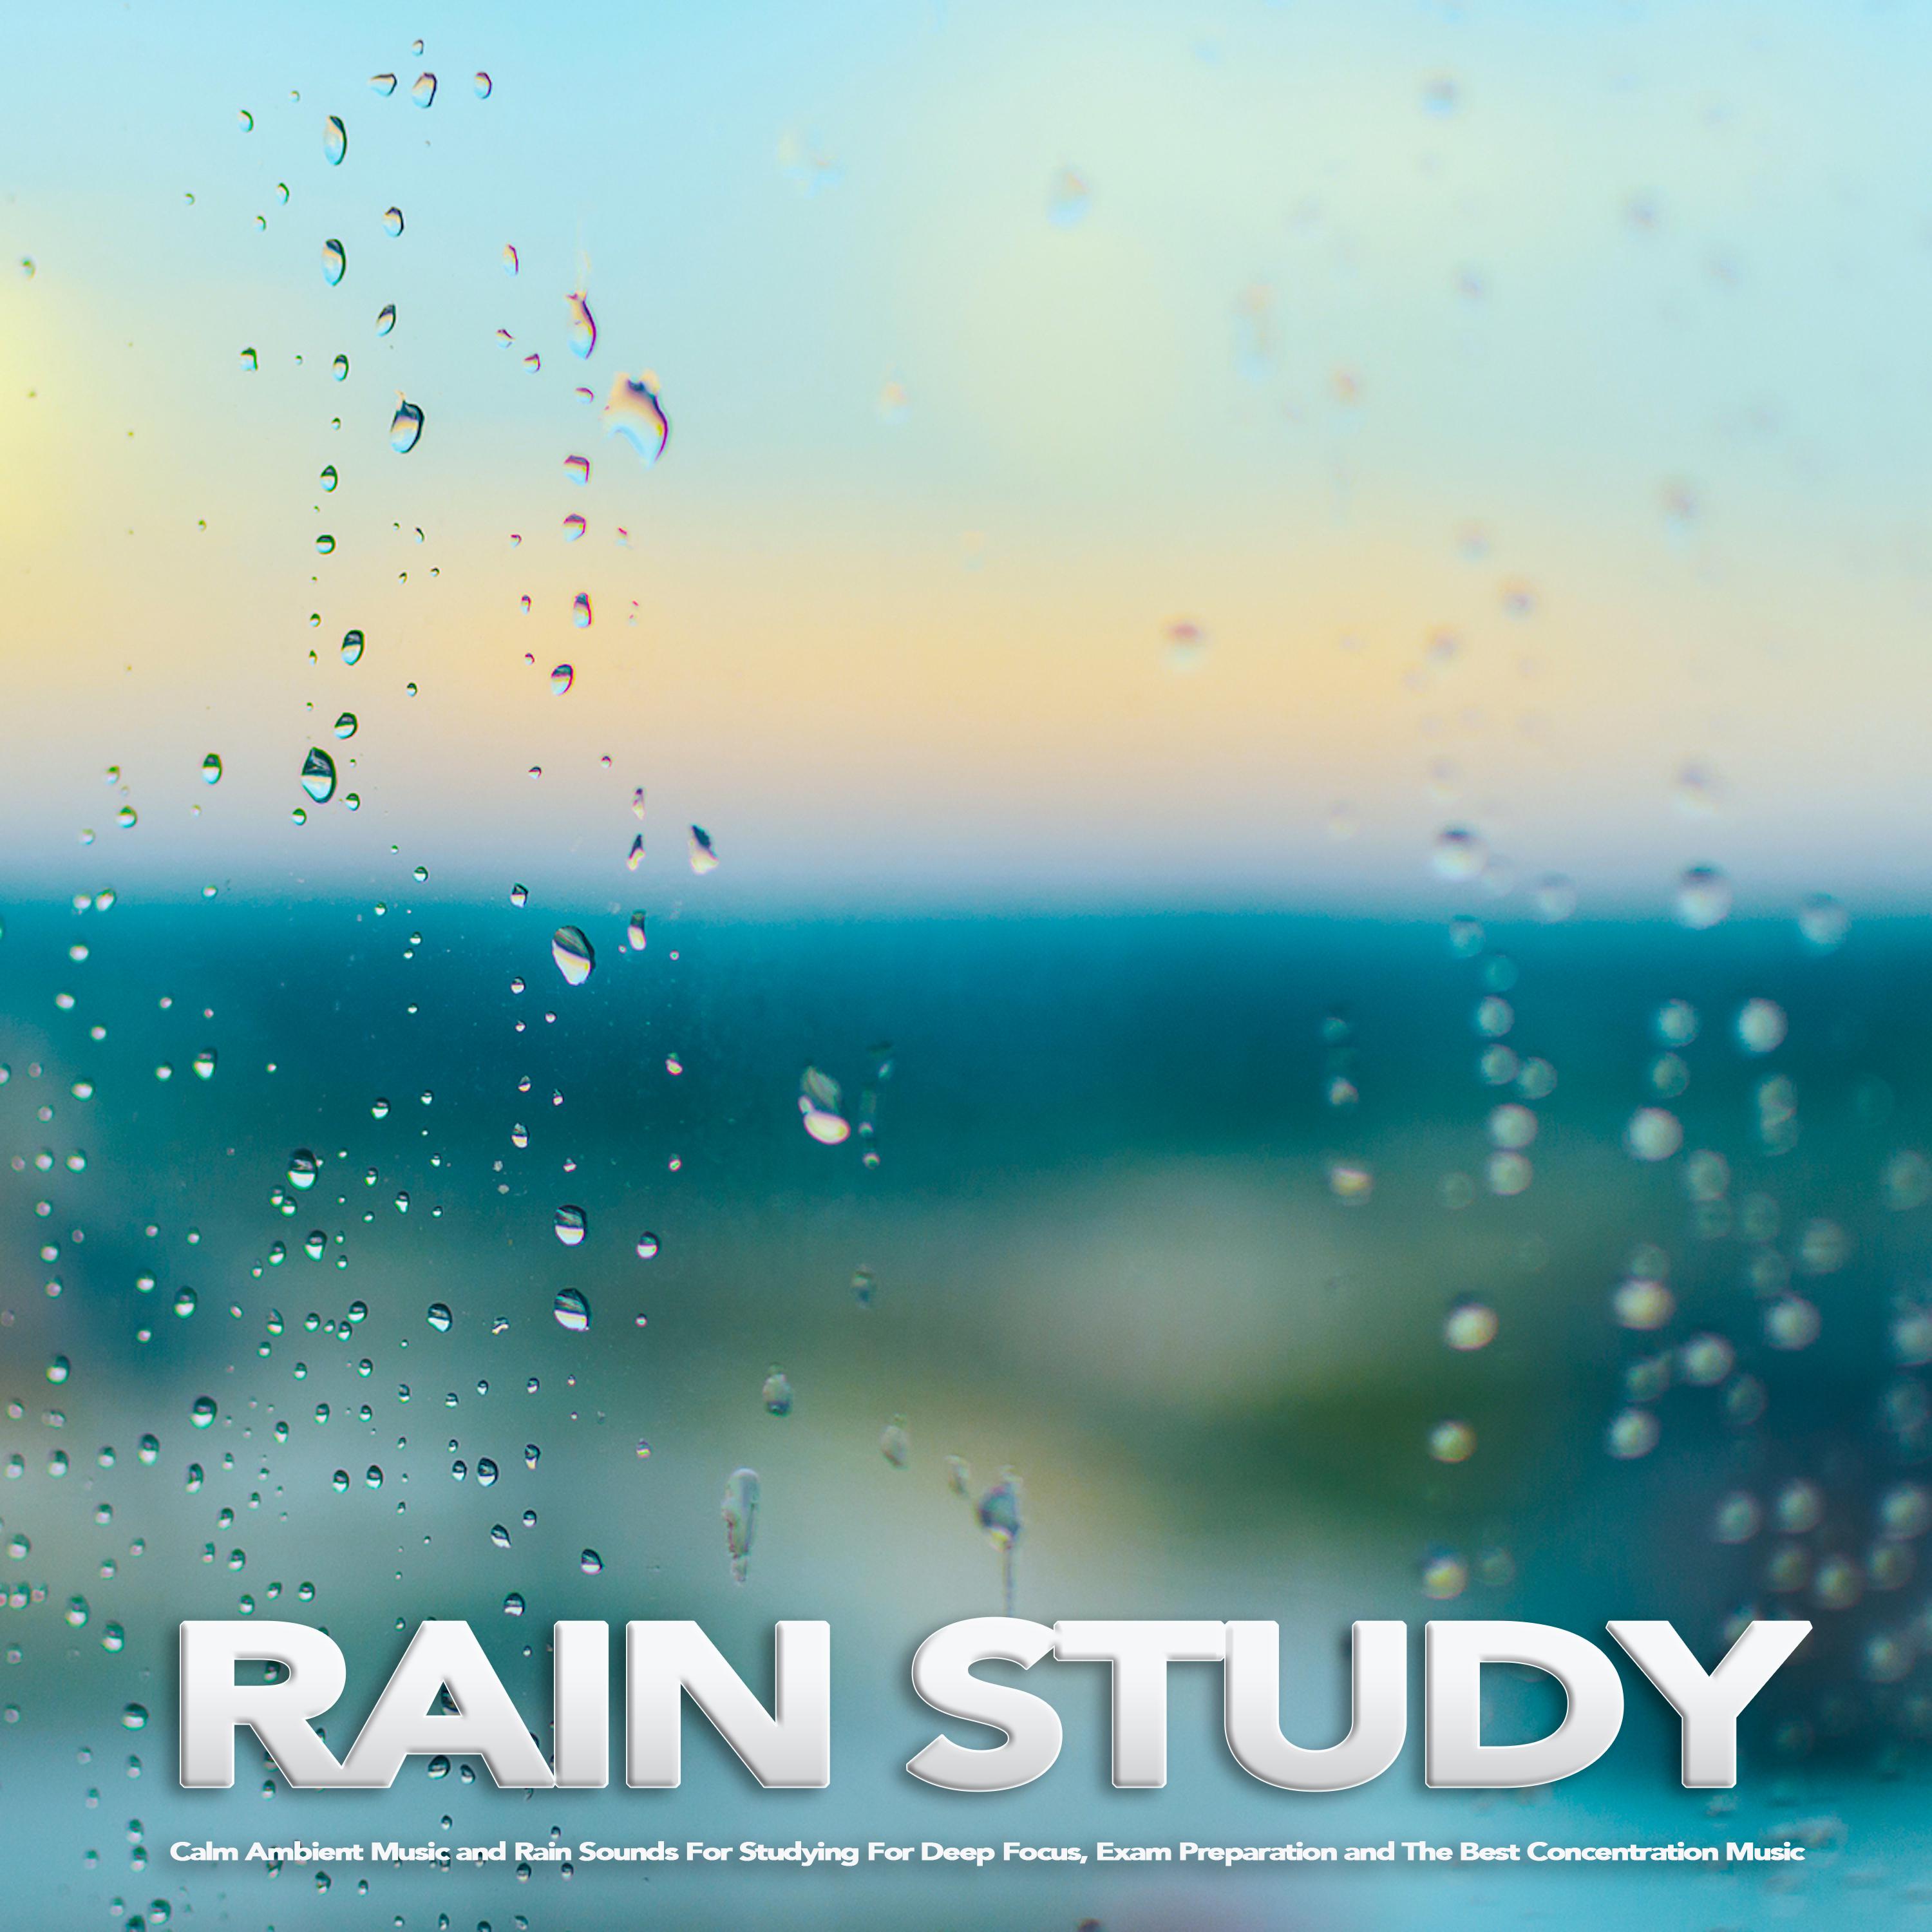 Rain Study: Calm Ambient Music and Rain Sounds For Studying For Deep Focus, Exam Preparation and The Best Concentration Music